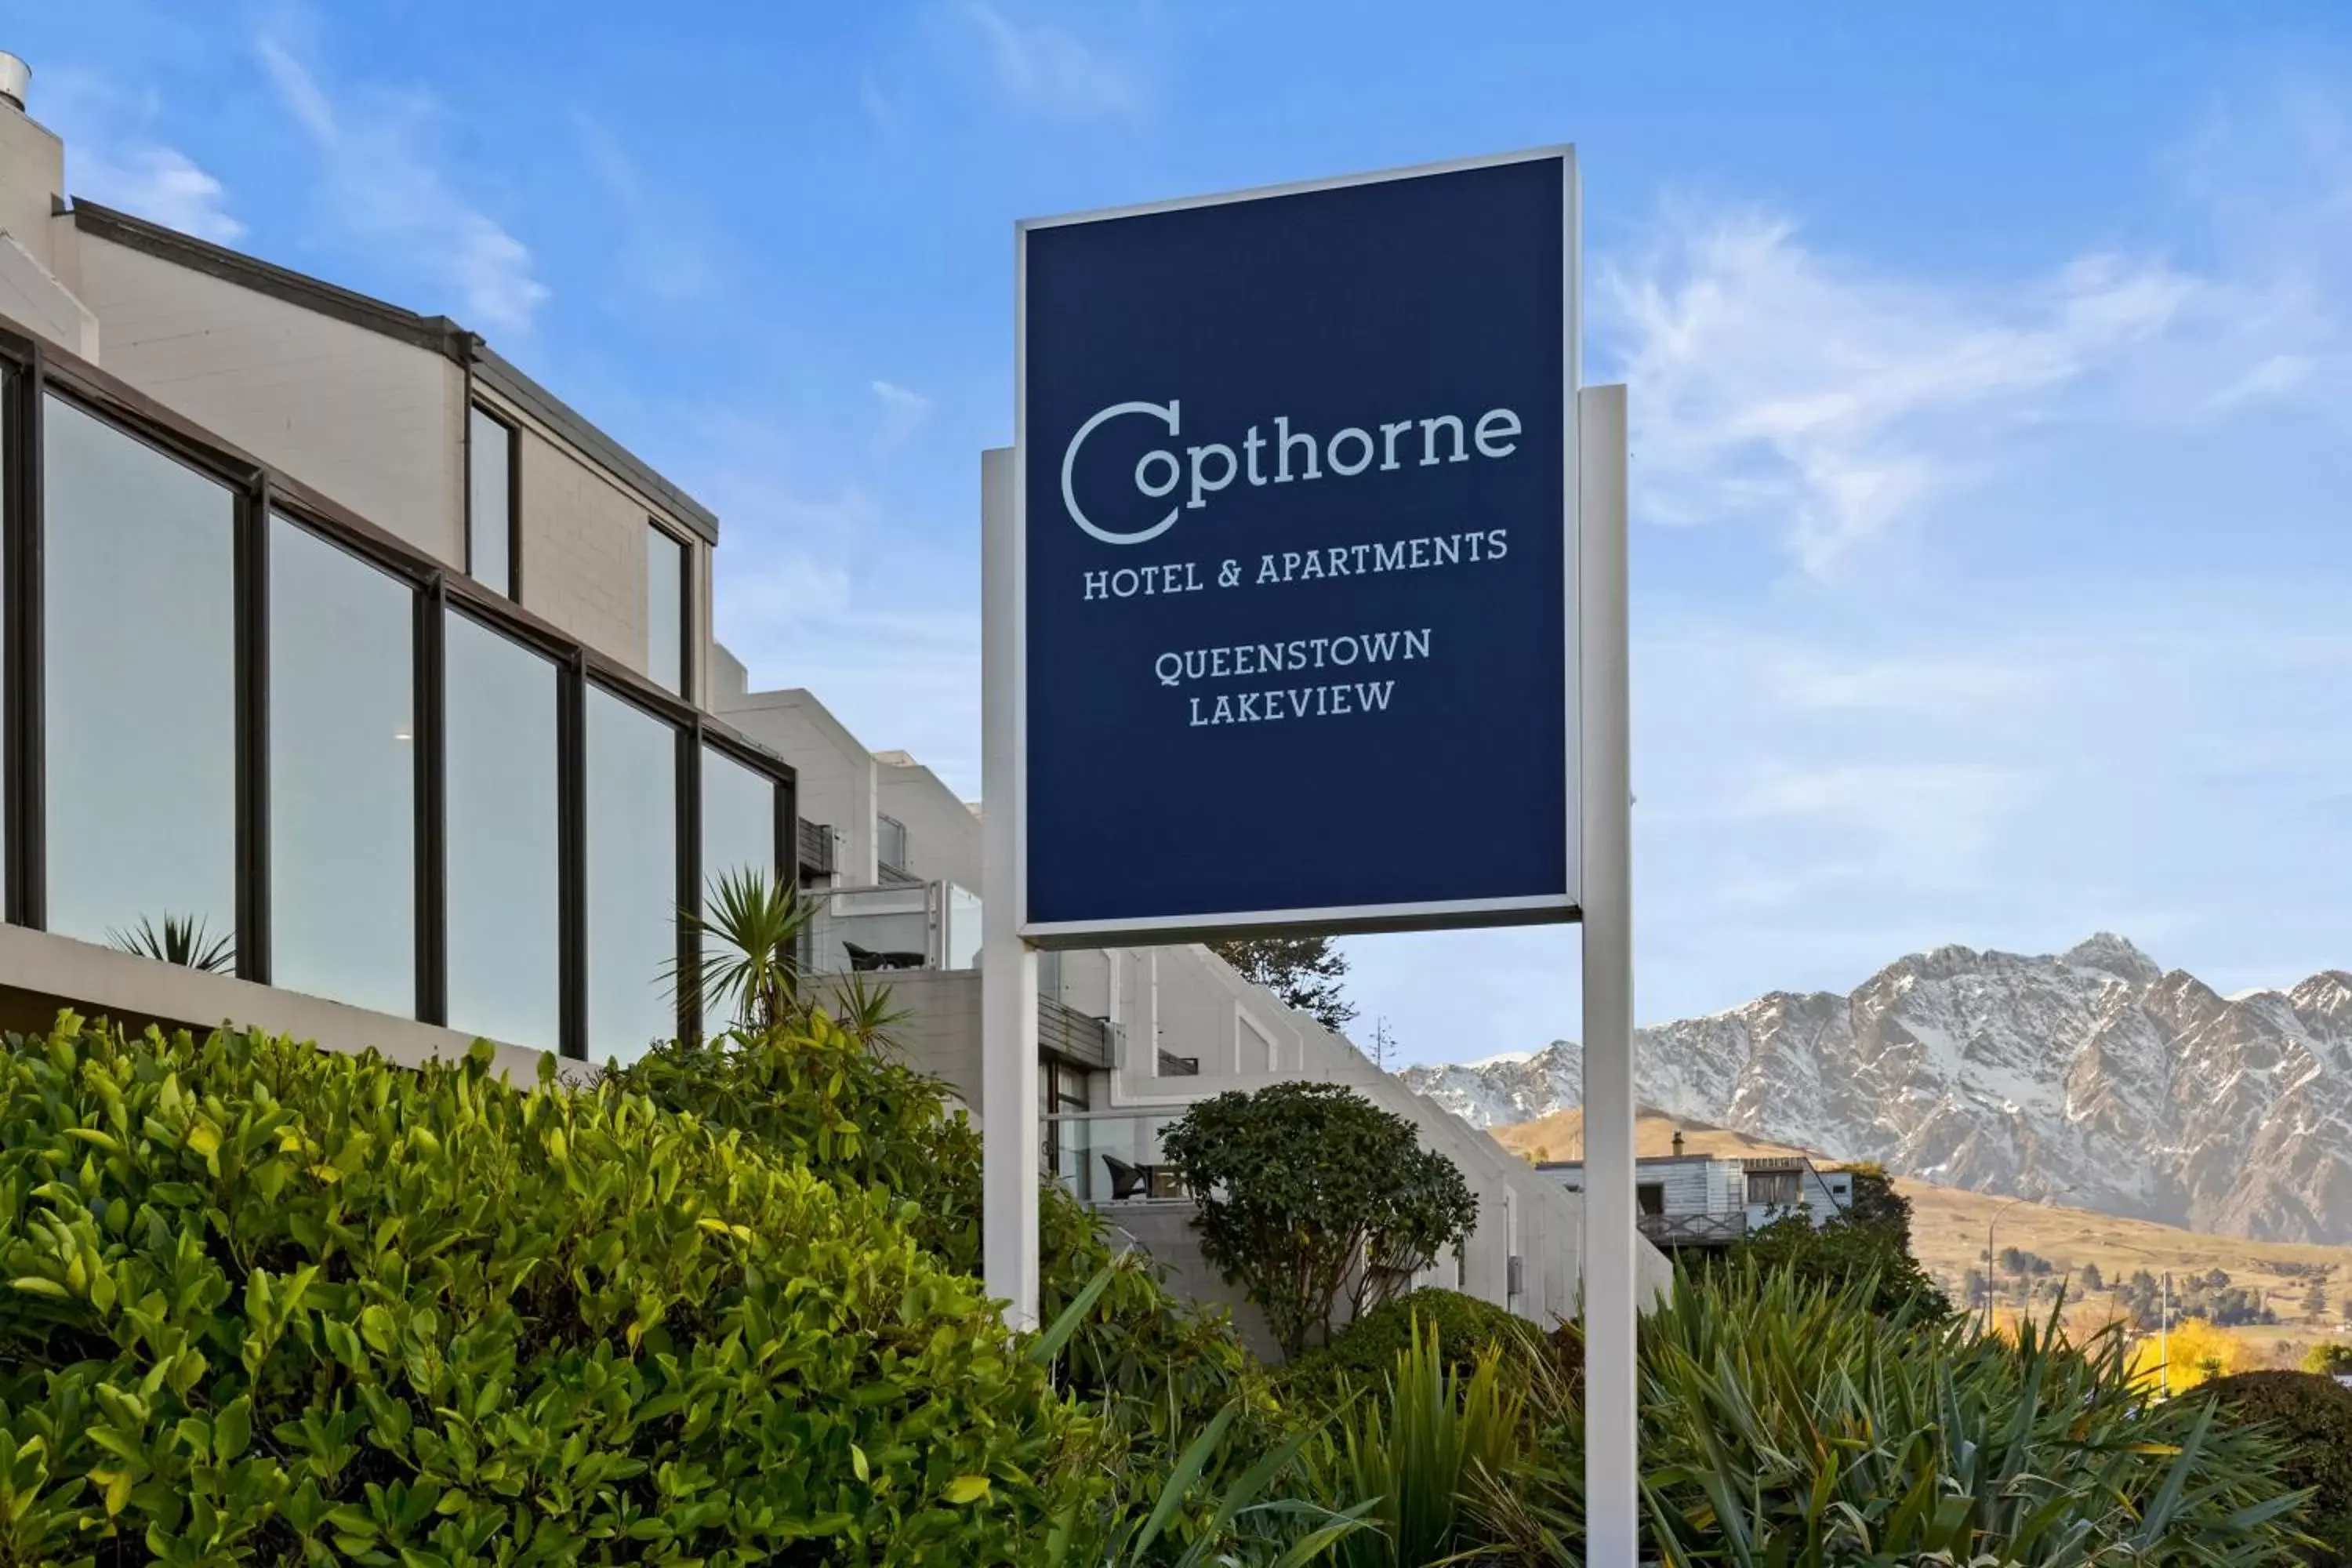 Property building in Copthorne Hotel & Apartments Queenstown Lakeview